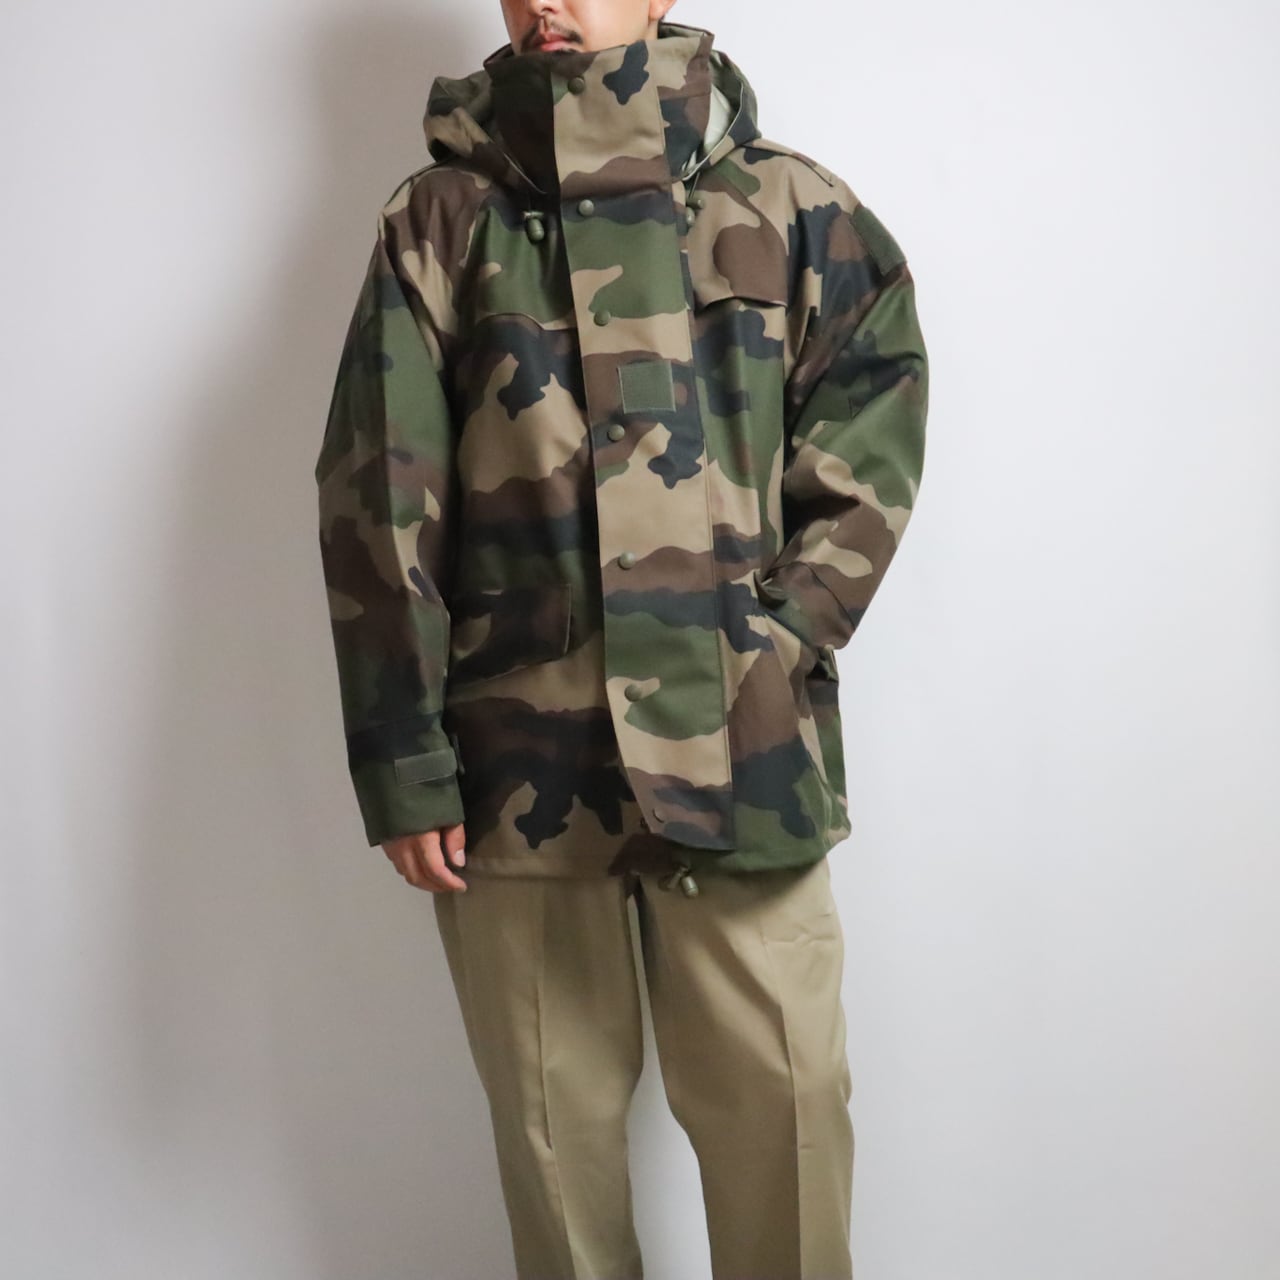 【DEAD STOCK】FRENCH ARMY CCE CAMO WATERPROOF FIELD JACKET フランス軍 CCEカモ  ウォータープルーフ ジャケット デッドストック